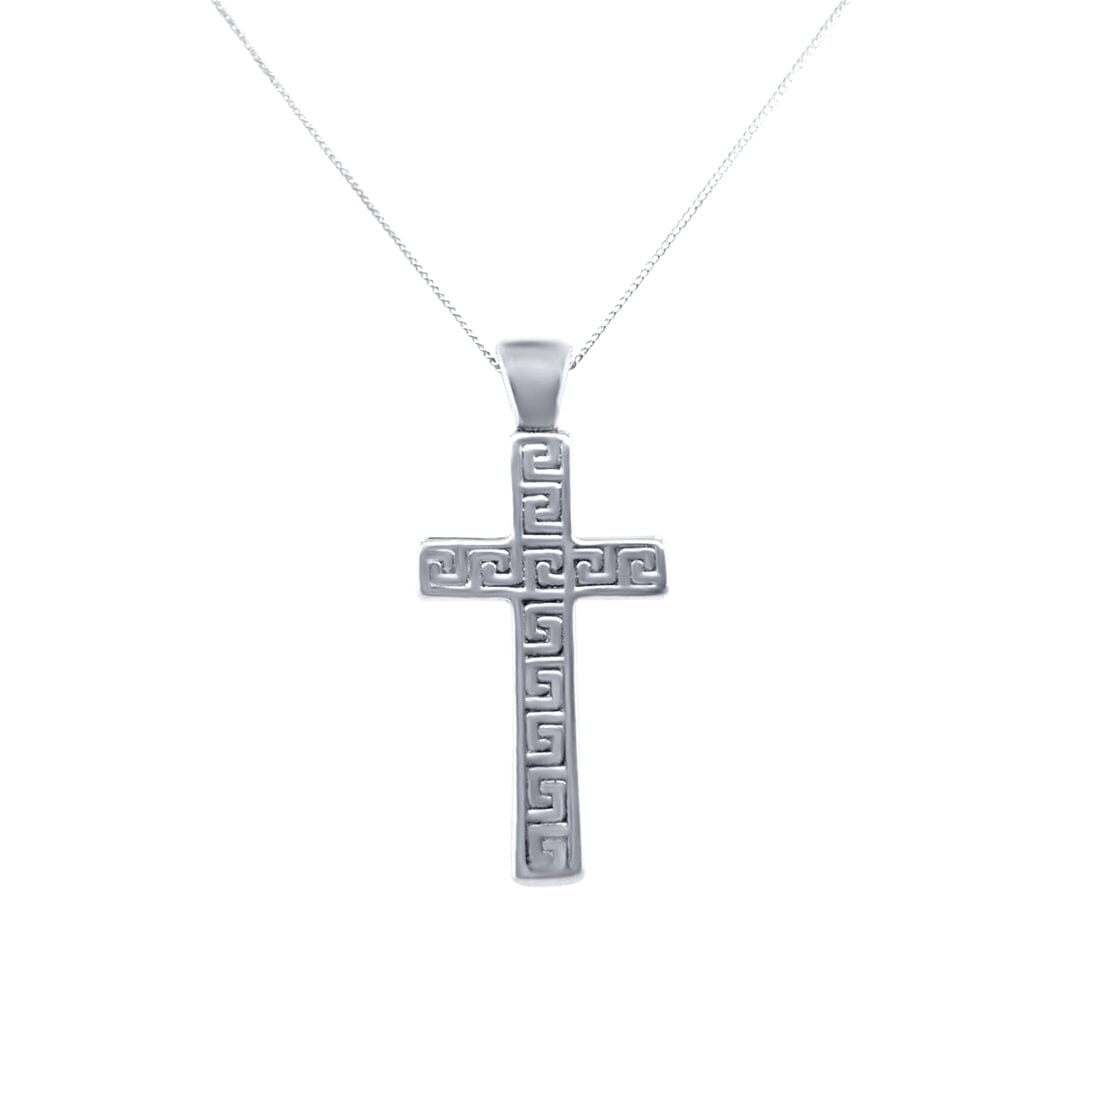 50cm Patterned Cross Necklace in Sterling Silver Necklaces Bevilles 